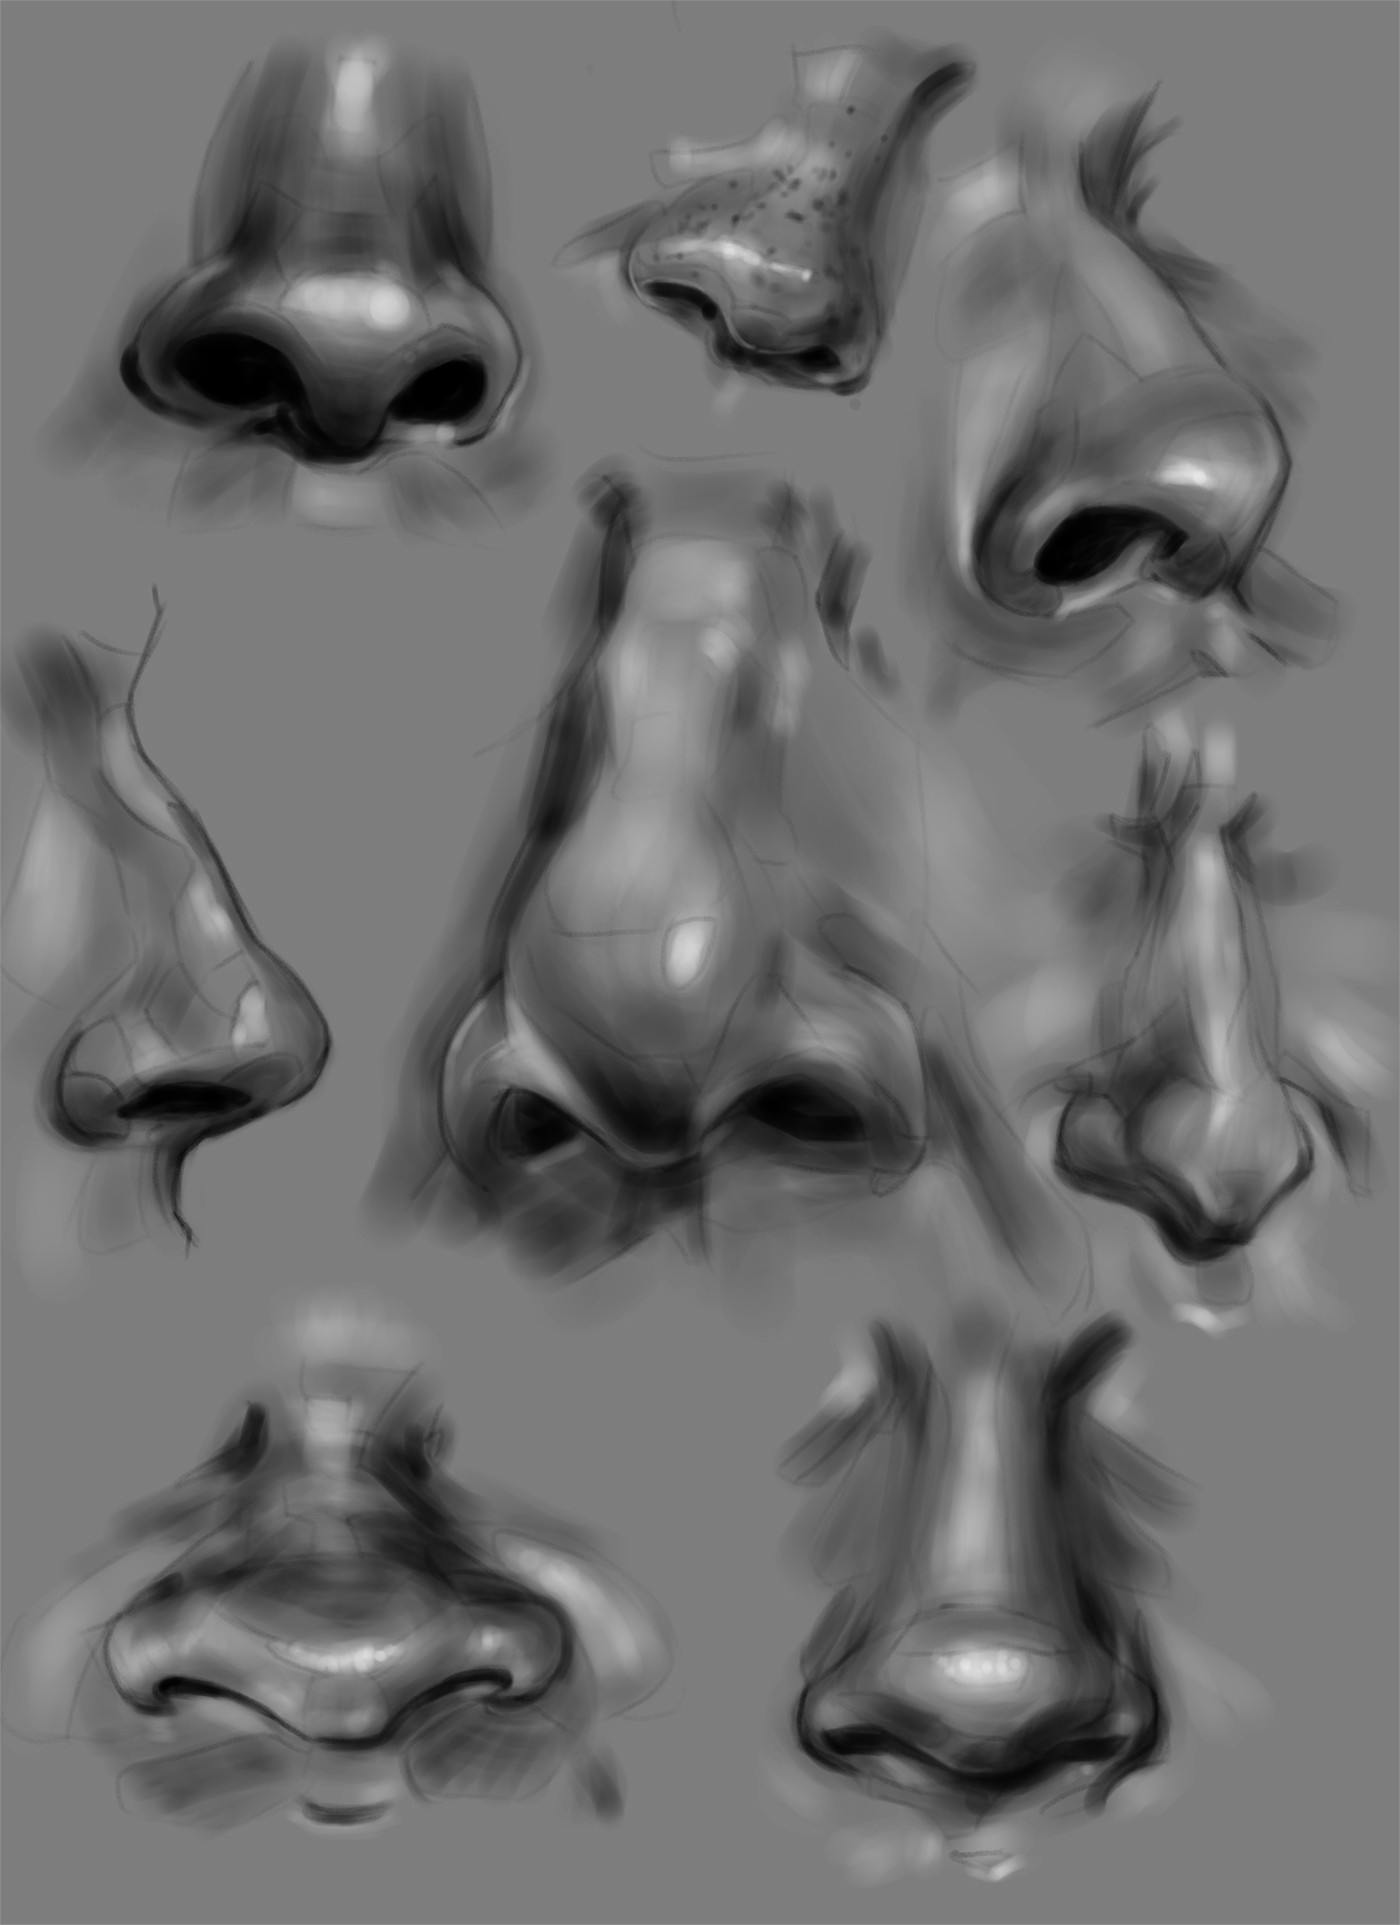 A digital sketch of several human noses done as a study of anatomy.